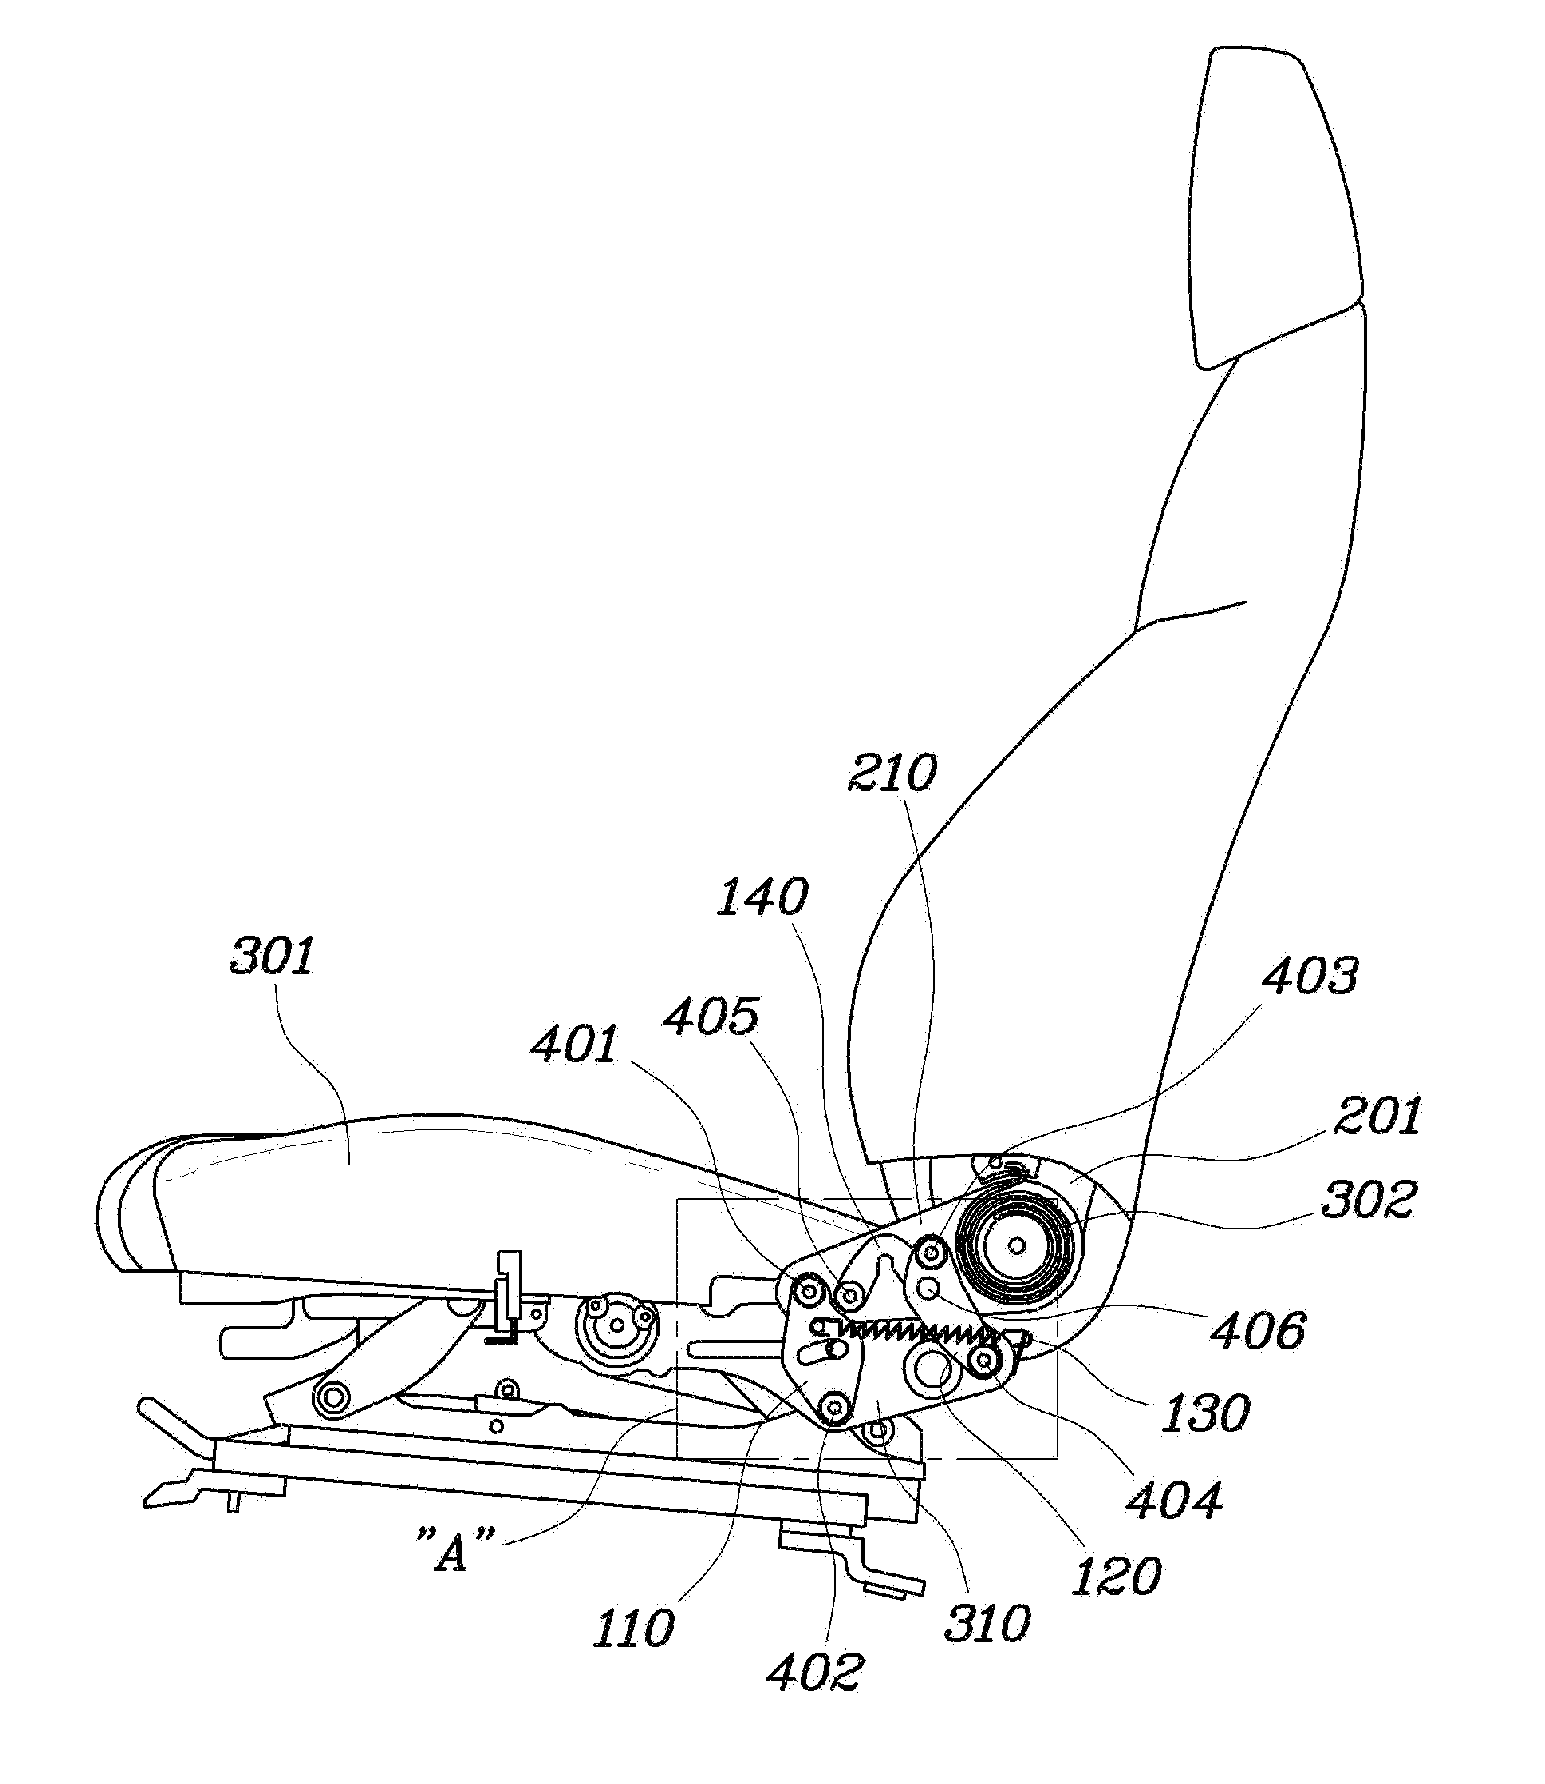 Apparatus for preventing neck injury for use in vehicle seat